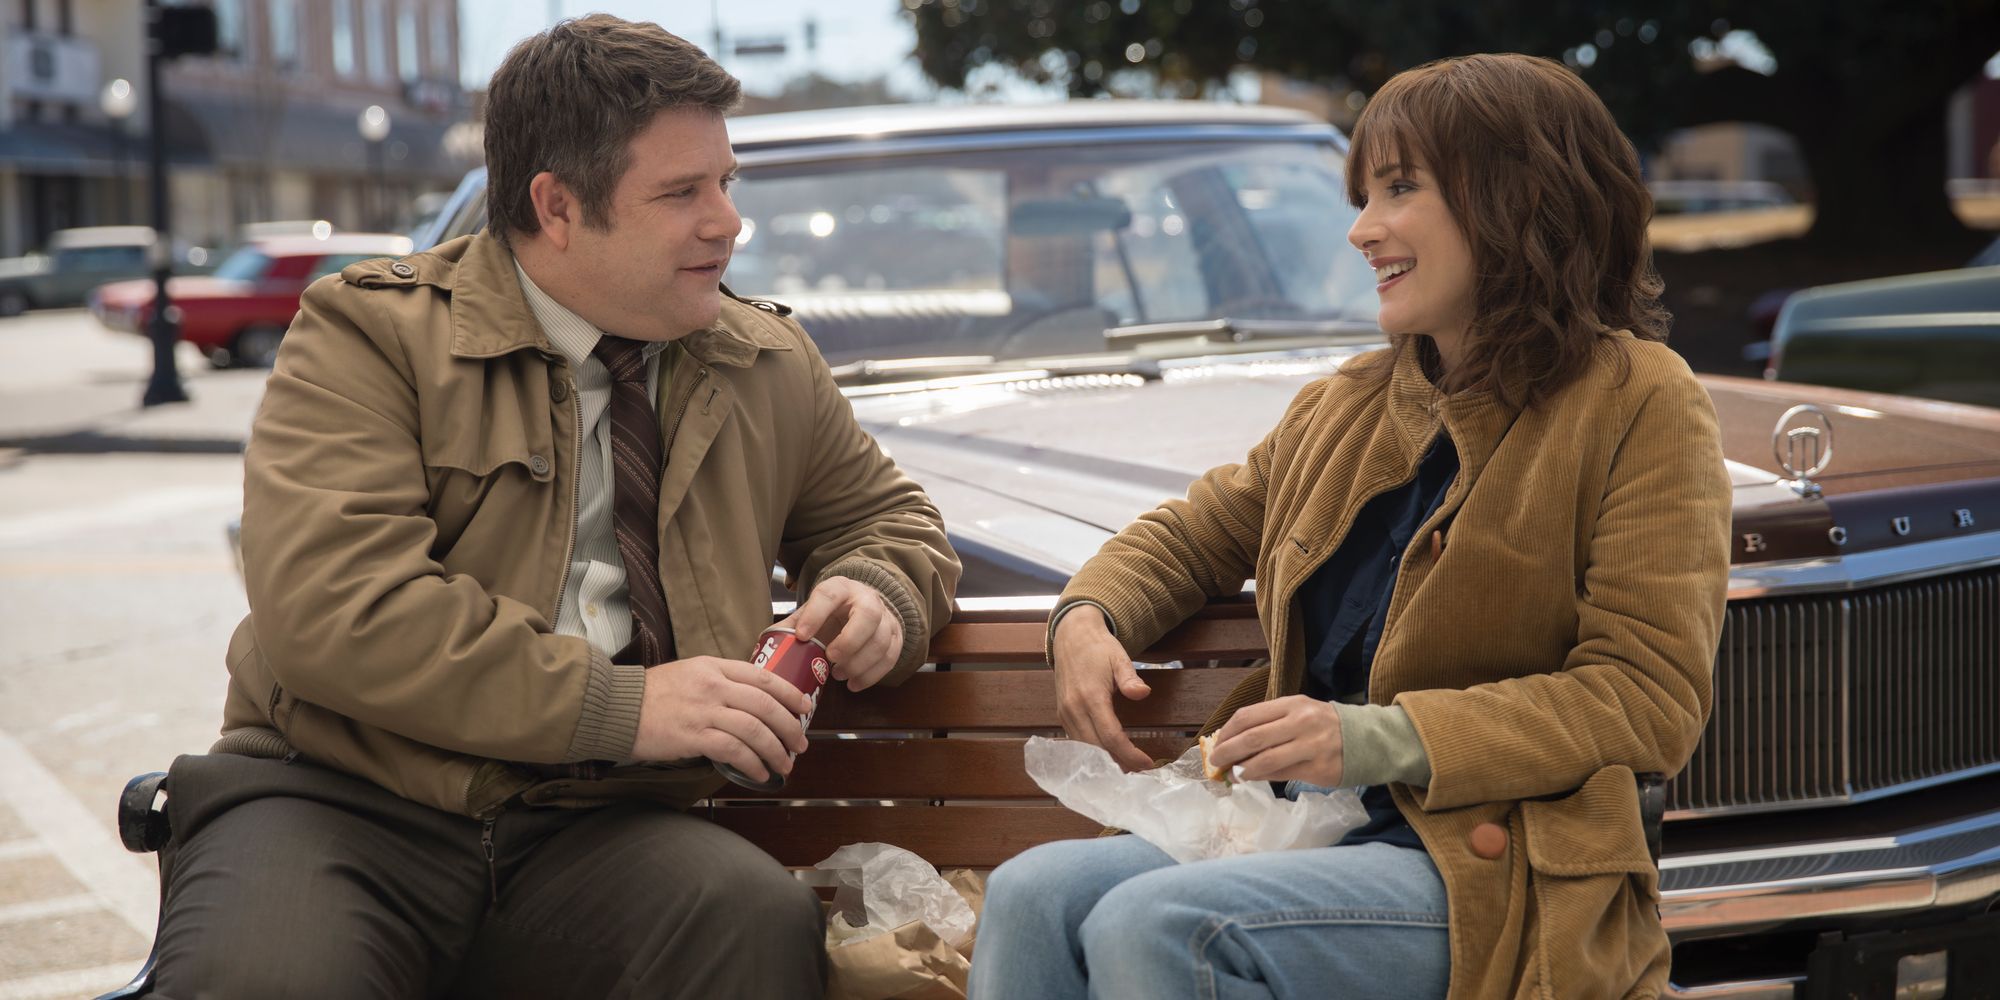 Sean Astin and Winona Ryder in Stranger Things 2